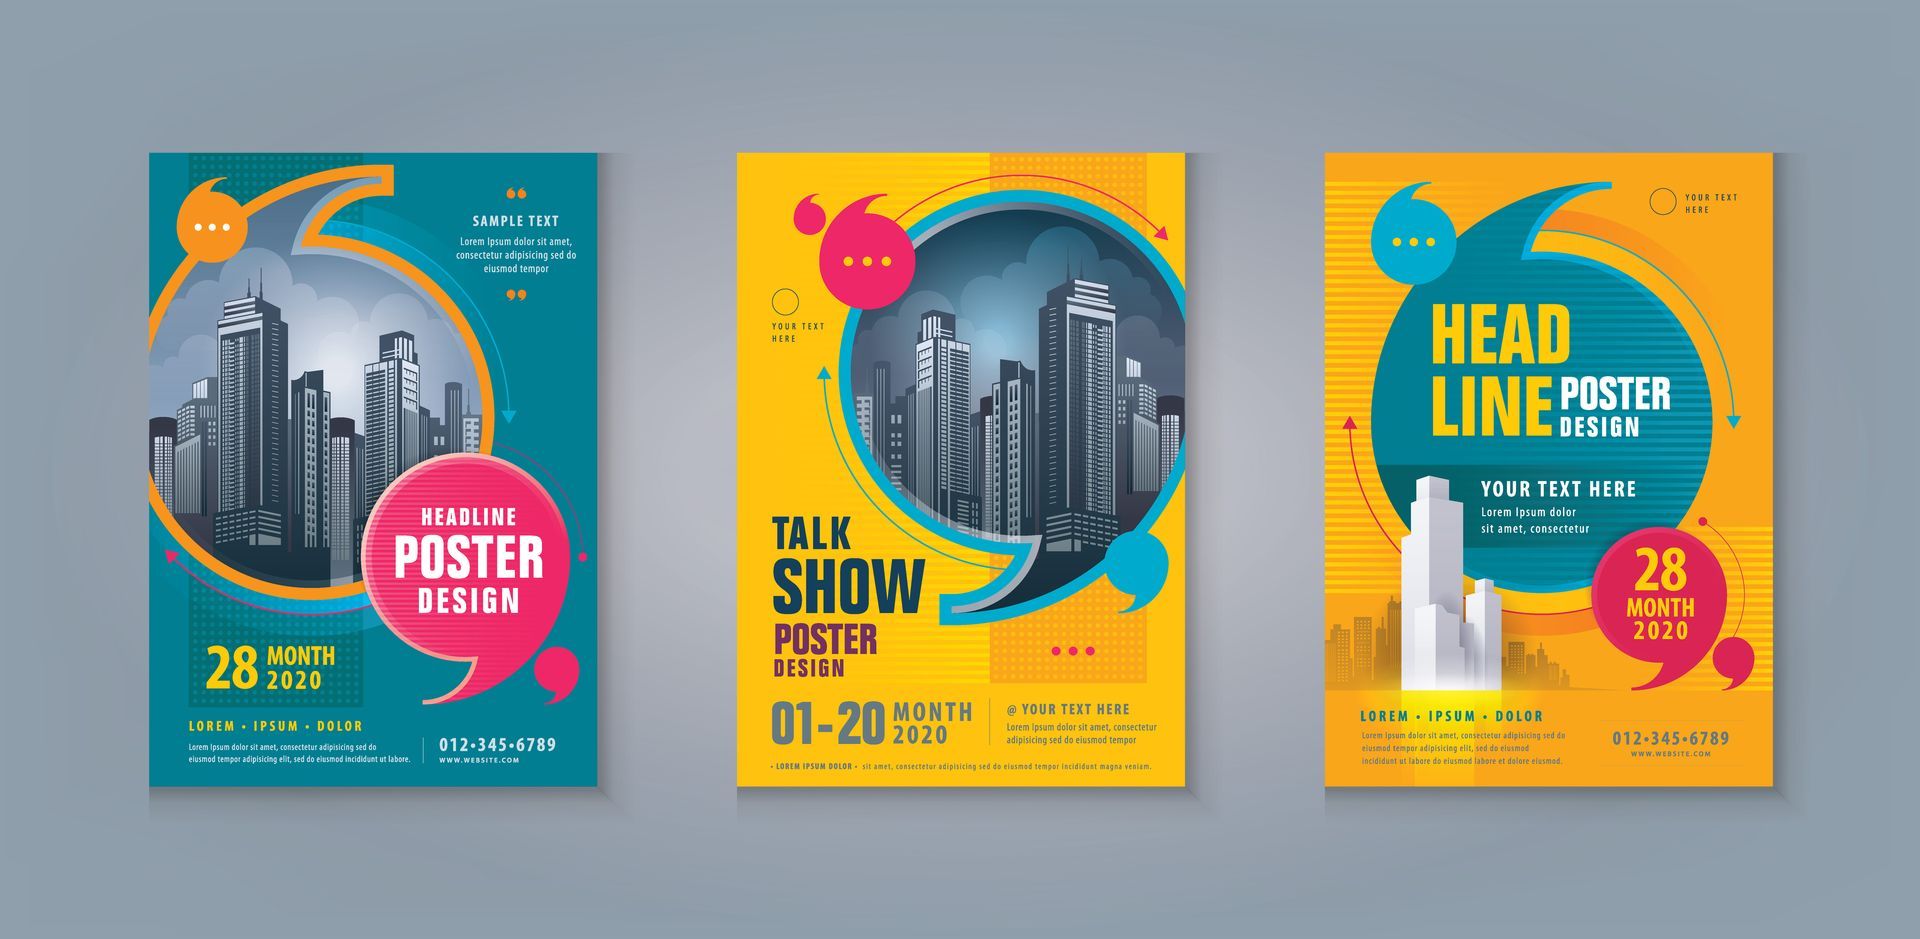 Baldwin Park Custom Posters For Conferences & Trade Shows